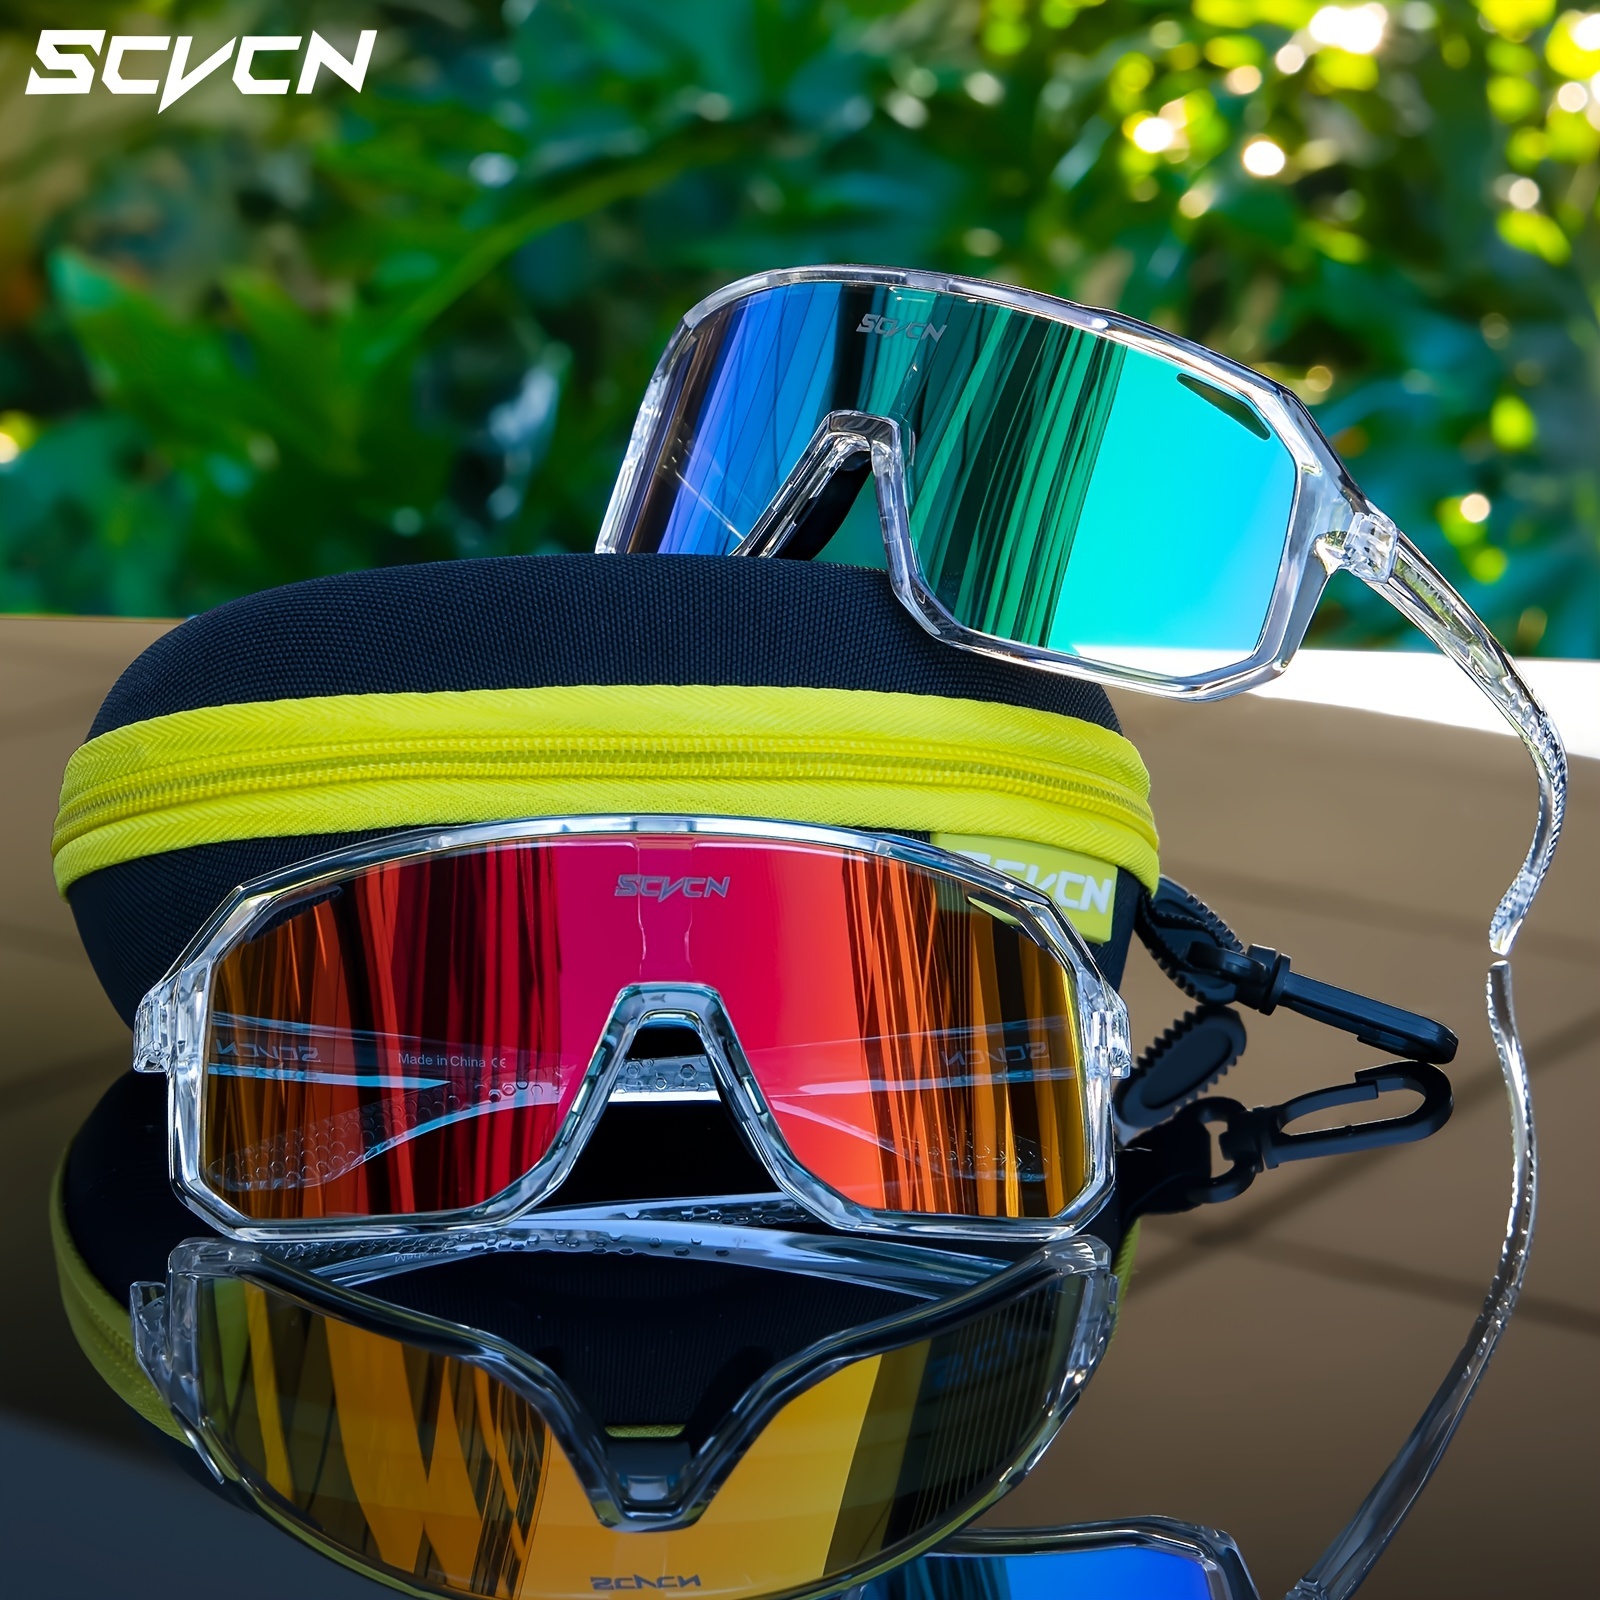 SCVCN Bicycle 1 Lens Cycling Glasses, Men Women Bike Sunglasses, Outdoor Sports Cycling Goggles, Safety Glasses, MTB Mountain Bike Cycling